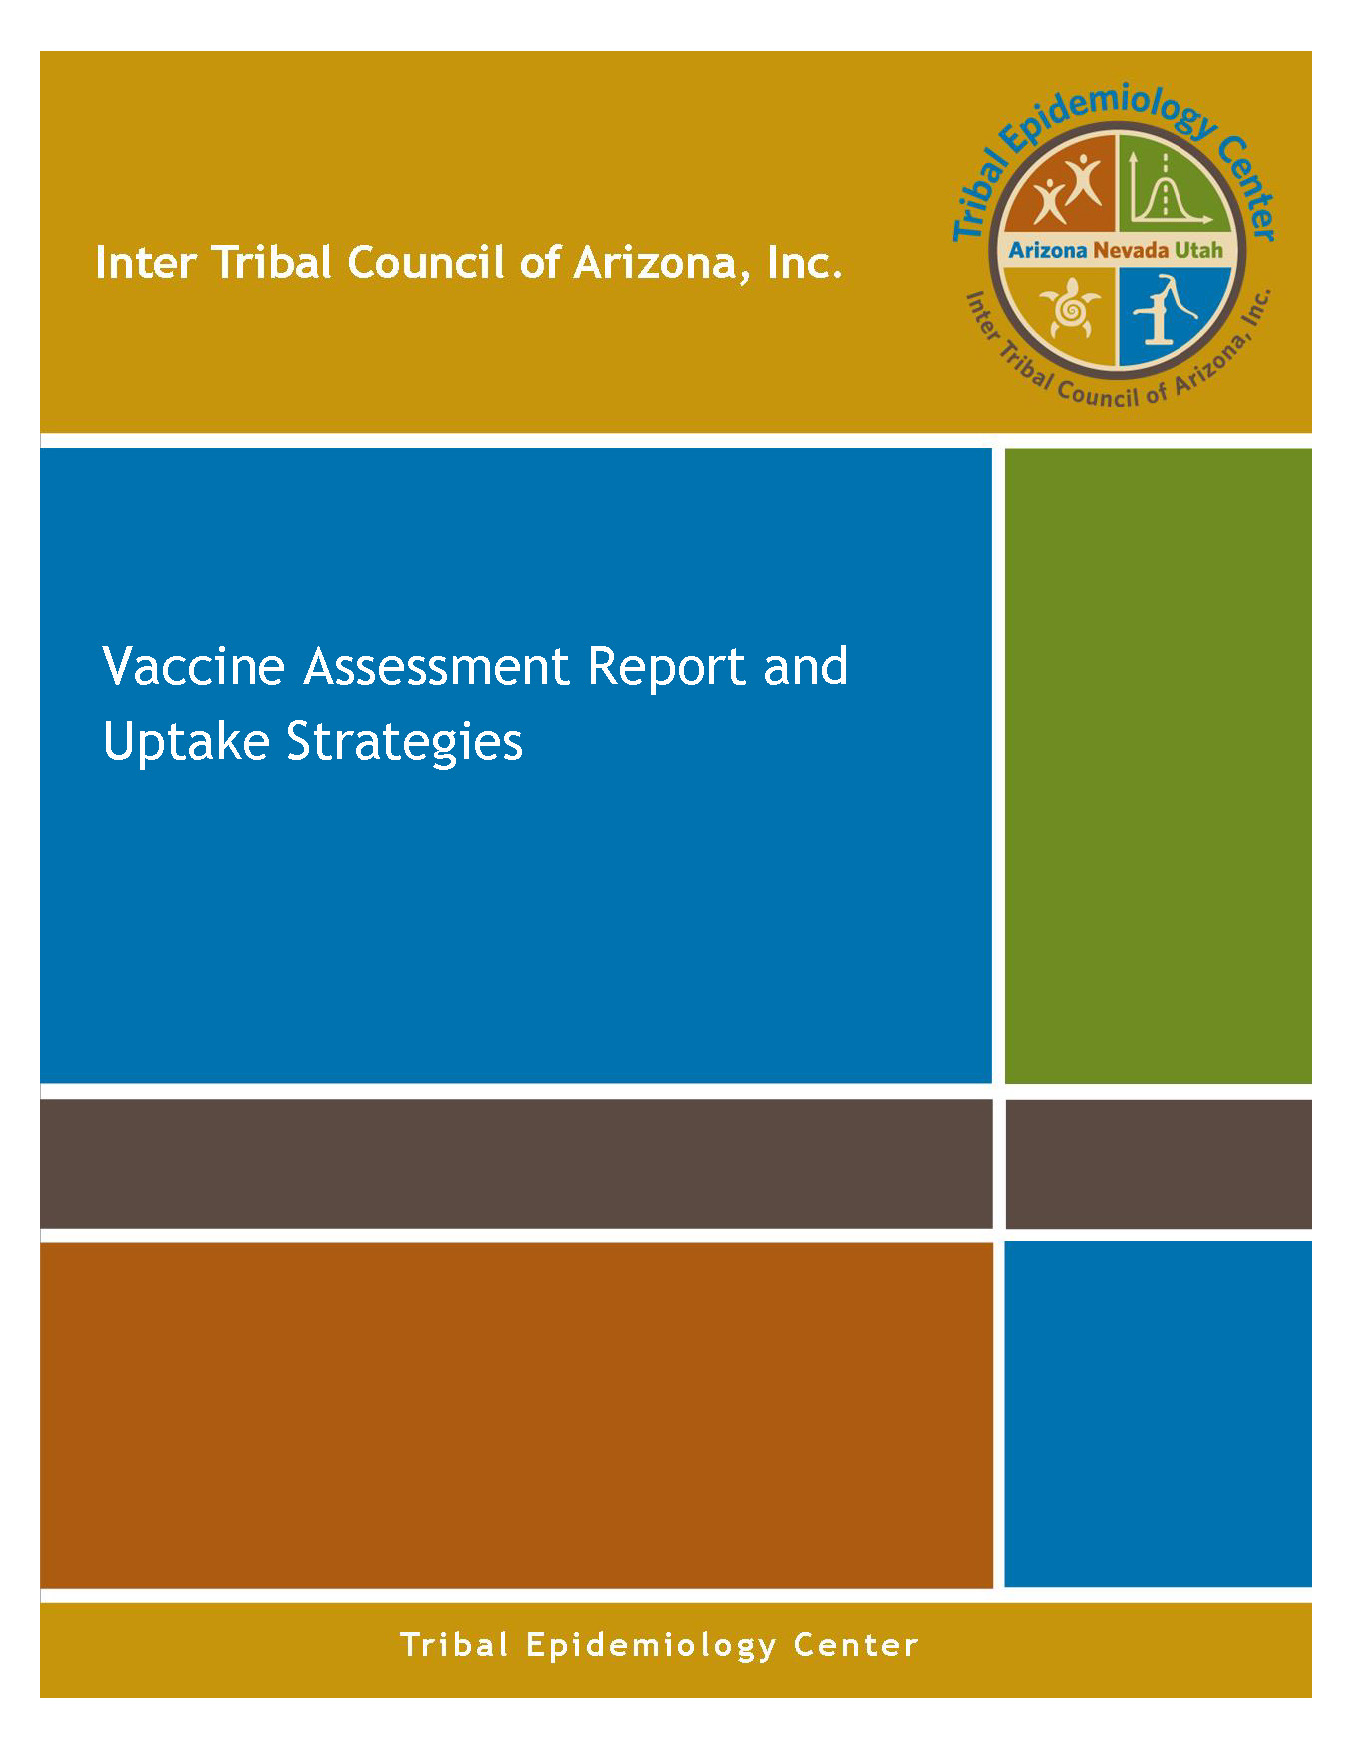 Vaccine Assessment and Strategies Report